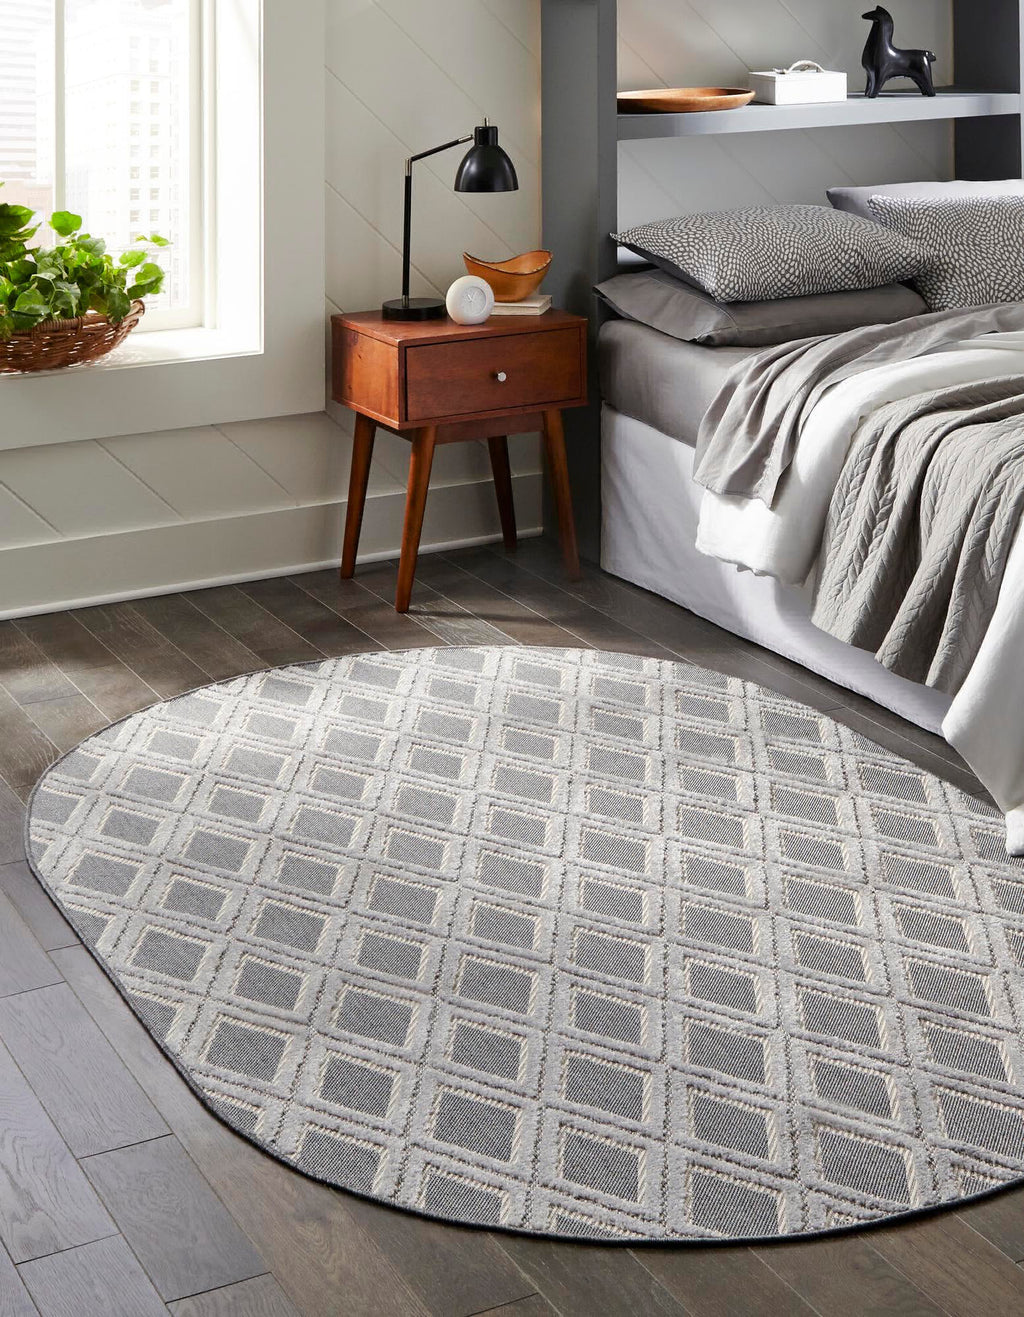 Unique Loom Arlo T-ARLO6 Charcoal Area Rug Oval Lifestyle Image Feature